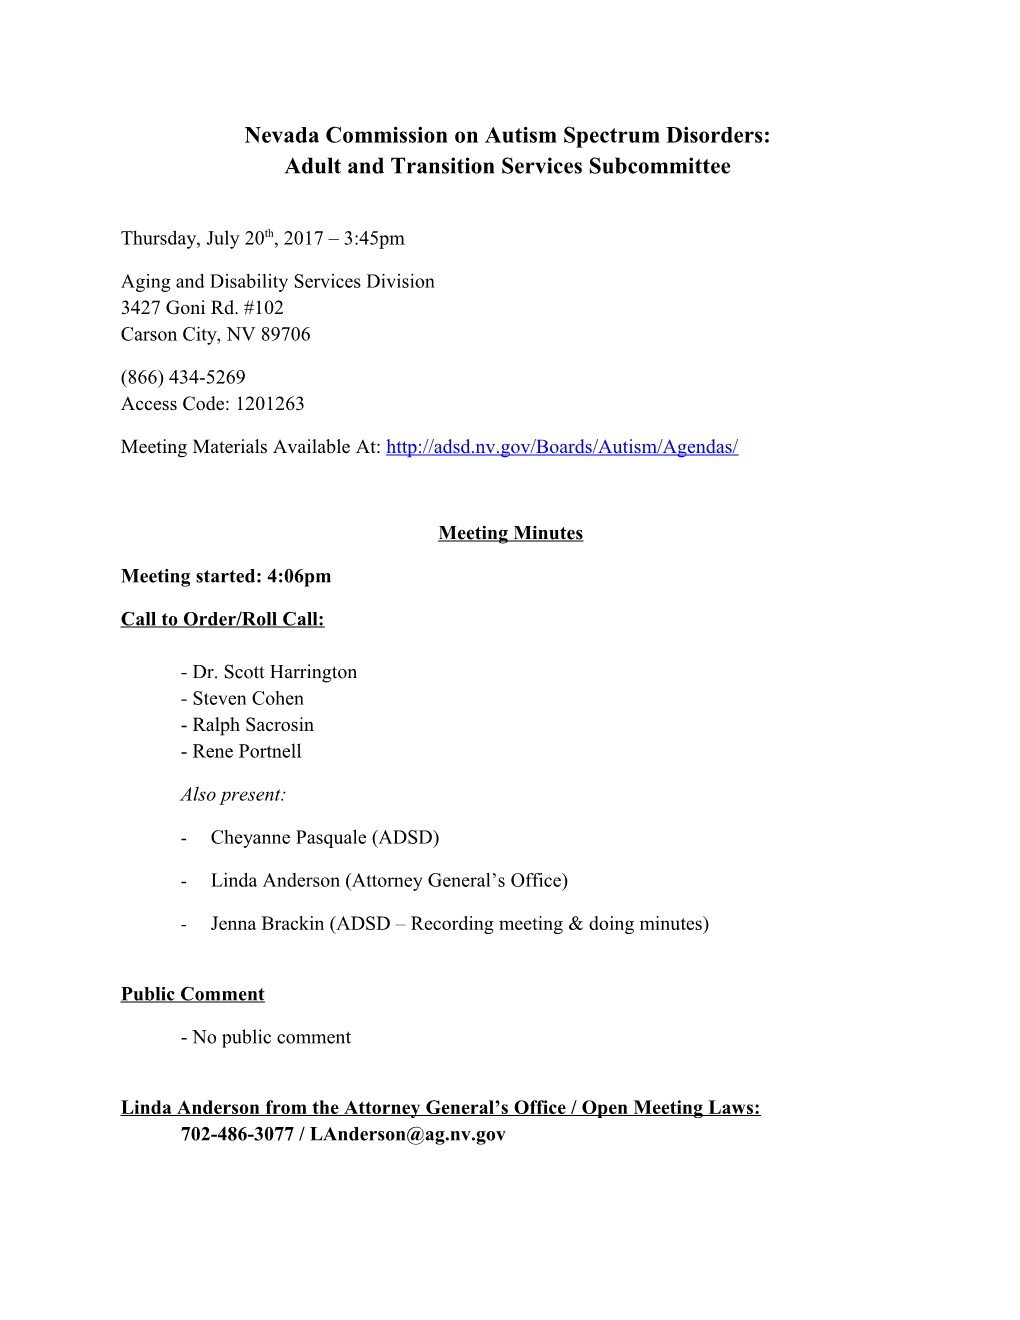 Nevada Commission on Autism Spectrum Disorders: Adult and Transition Services Subcommittee